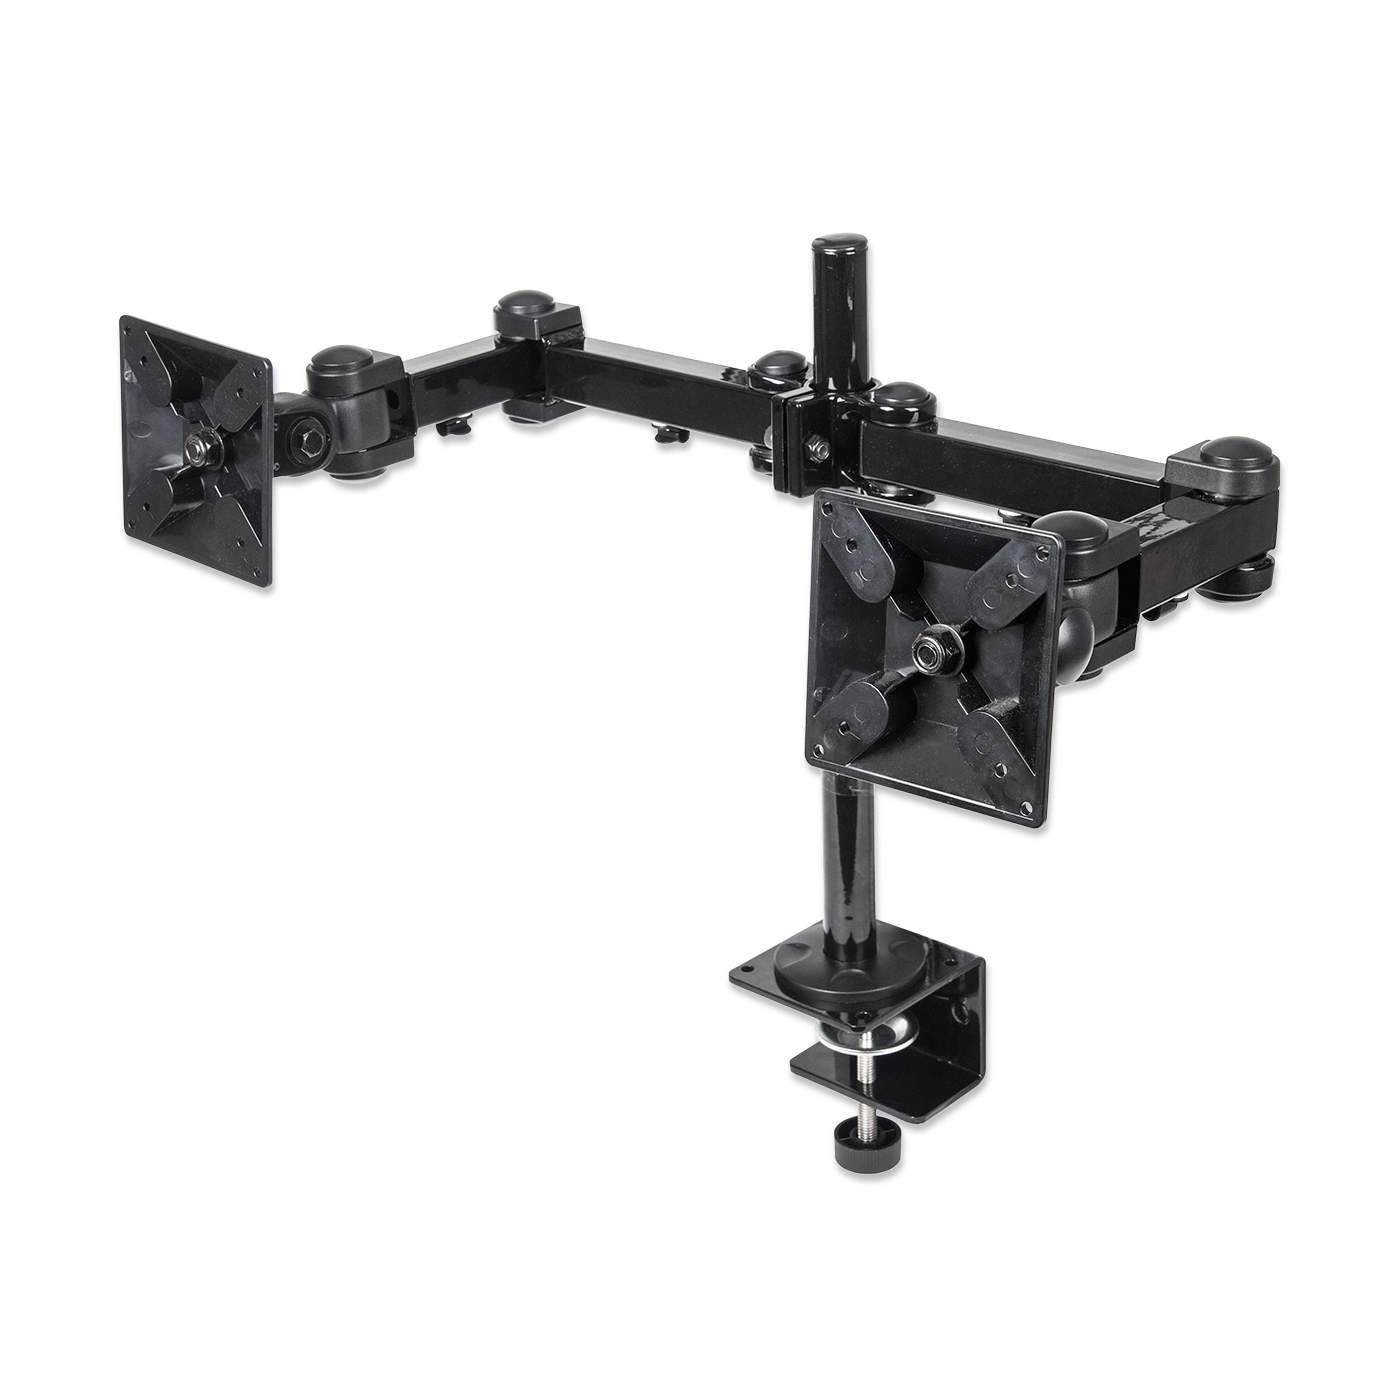 LCD Monitor Mount with Double-Link Swing Arms Image 1